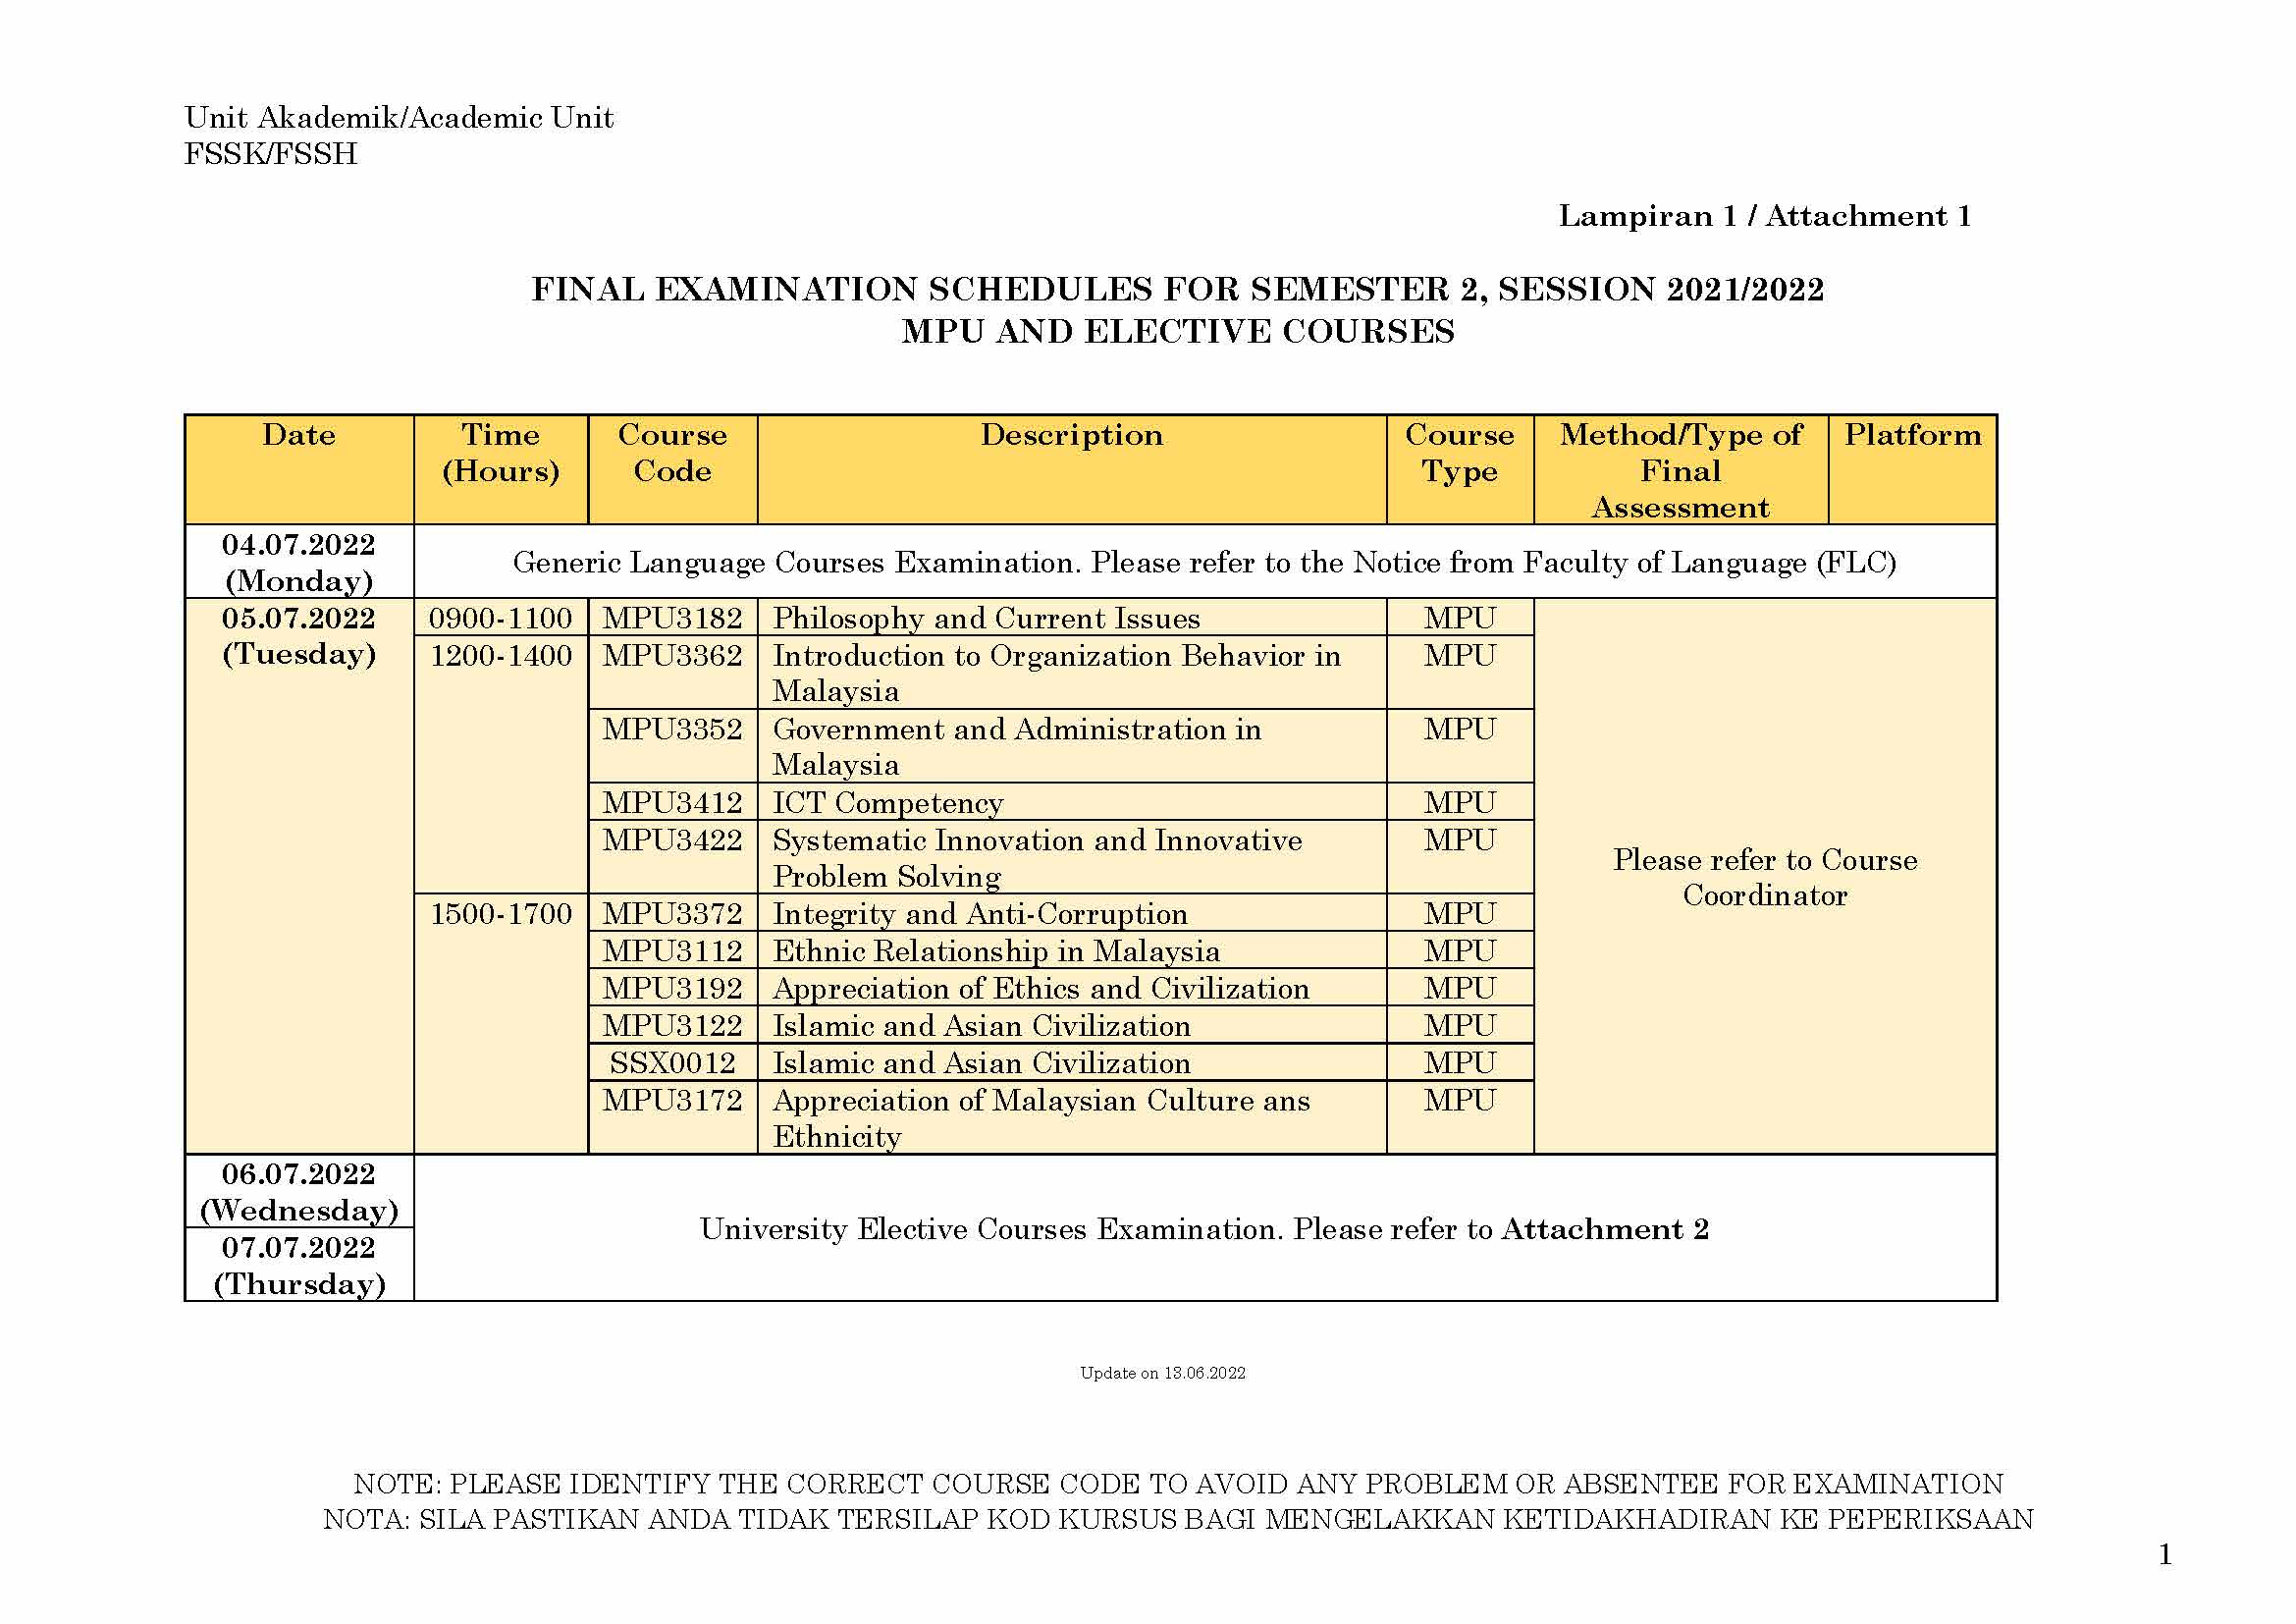 FINAL EXAMINATION SCHEDULES FOR SEMESTER 2 SESSION 2021 2022 Page 2